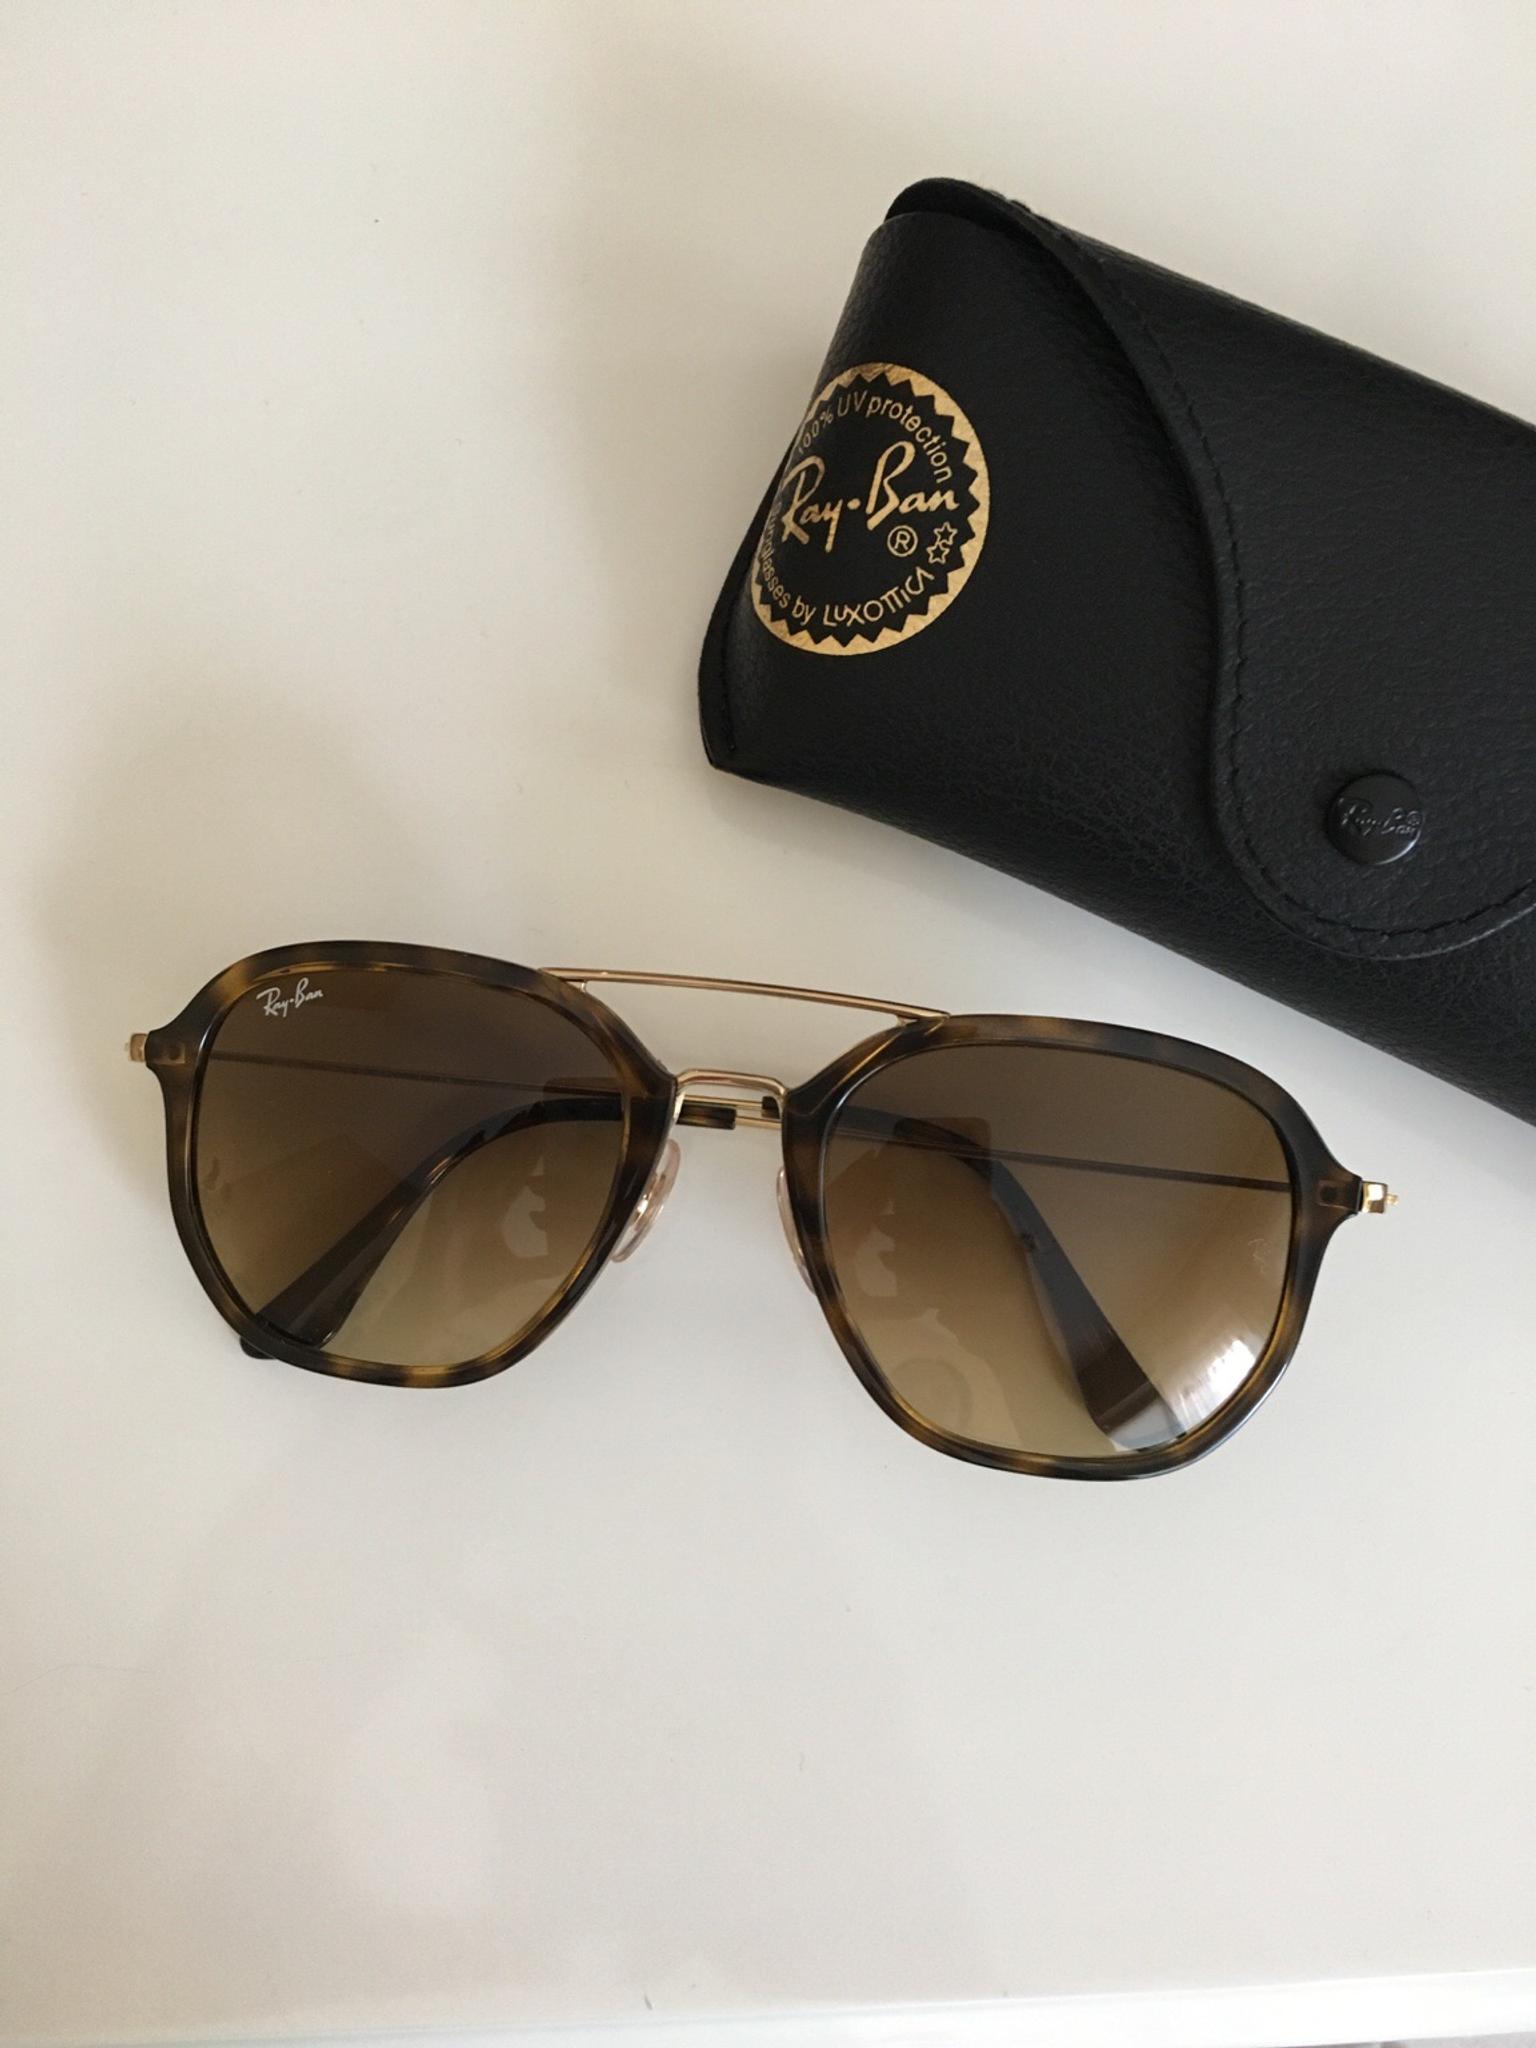 sonnenbrille ray ban